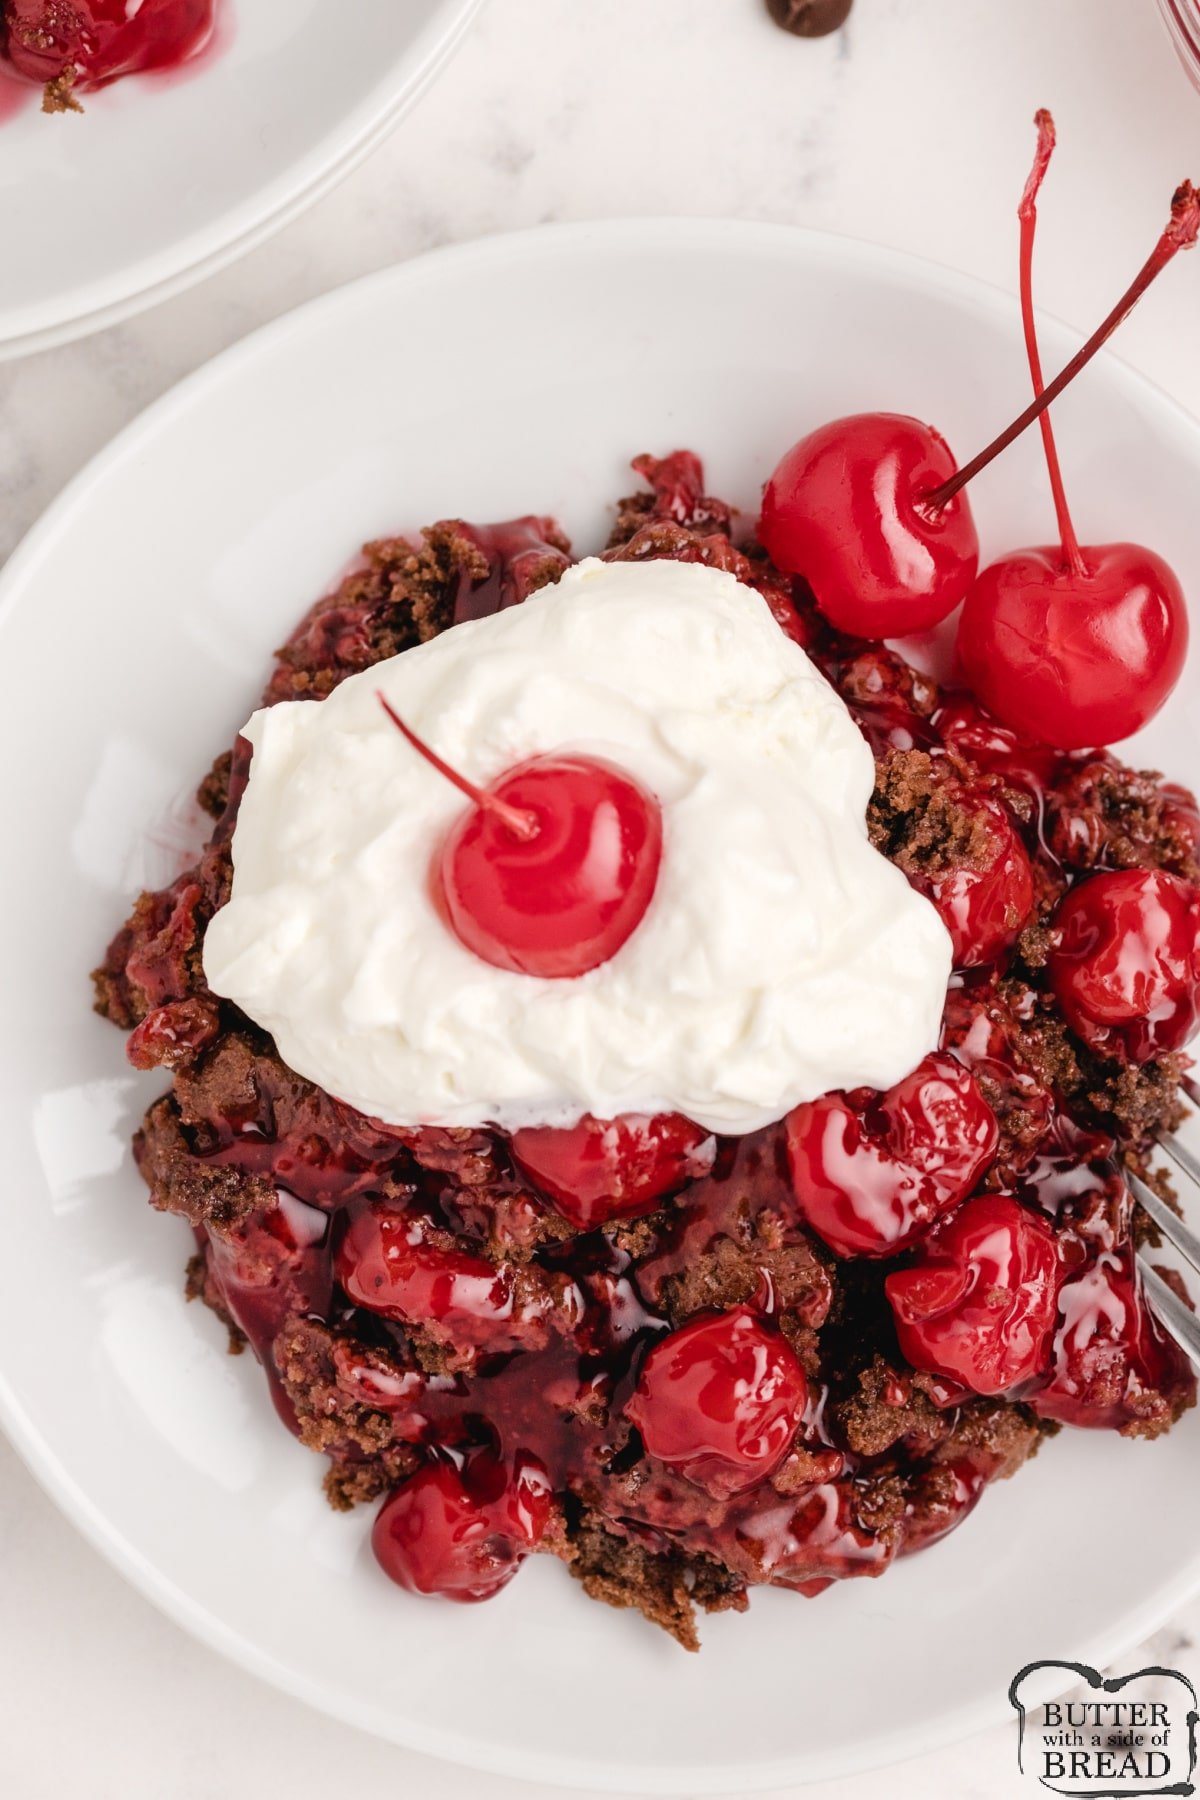 Chocolate Cherry Cobbler is a tasty variation on the traditional cherry cobbler recipe. Canned cherry pie filling baked with a simple crust made with melted chocolate chips. 